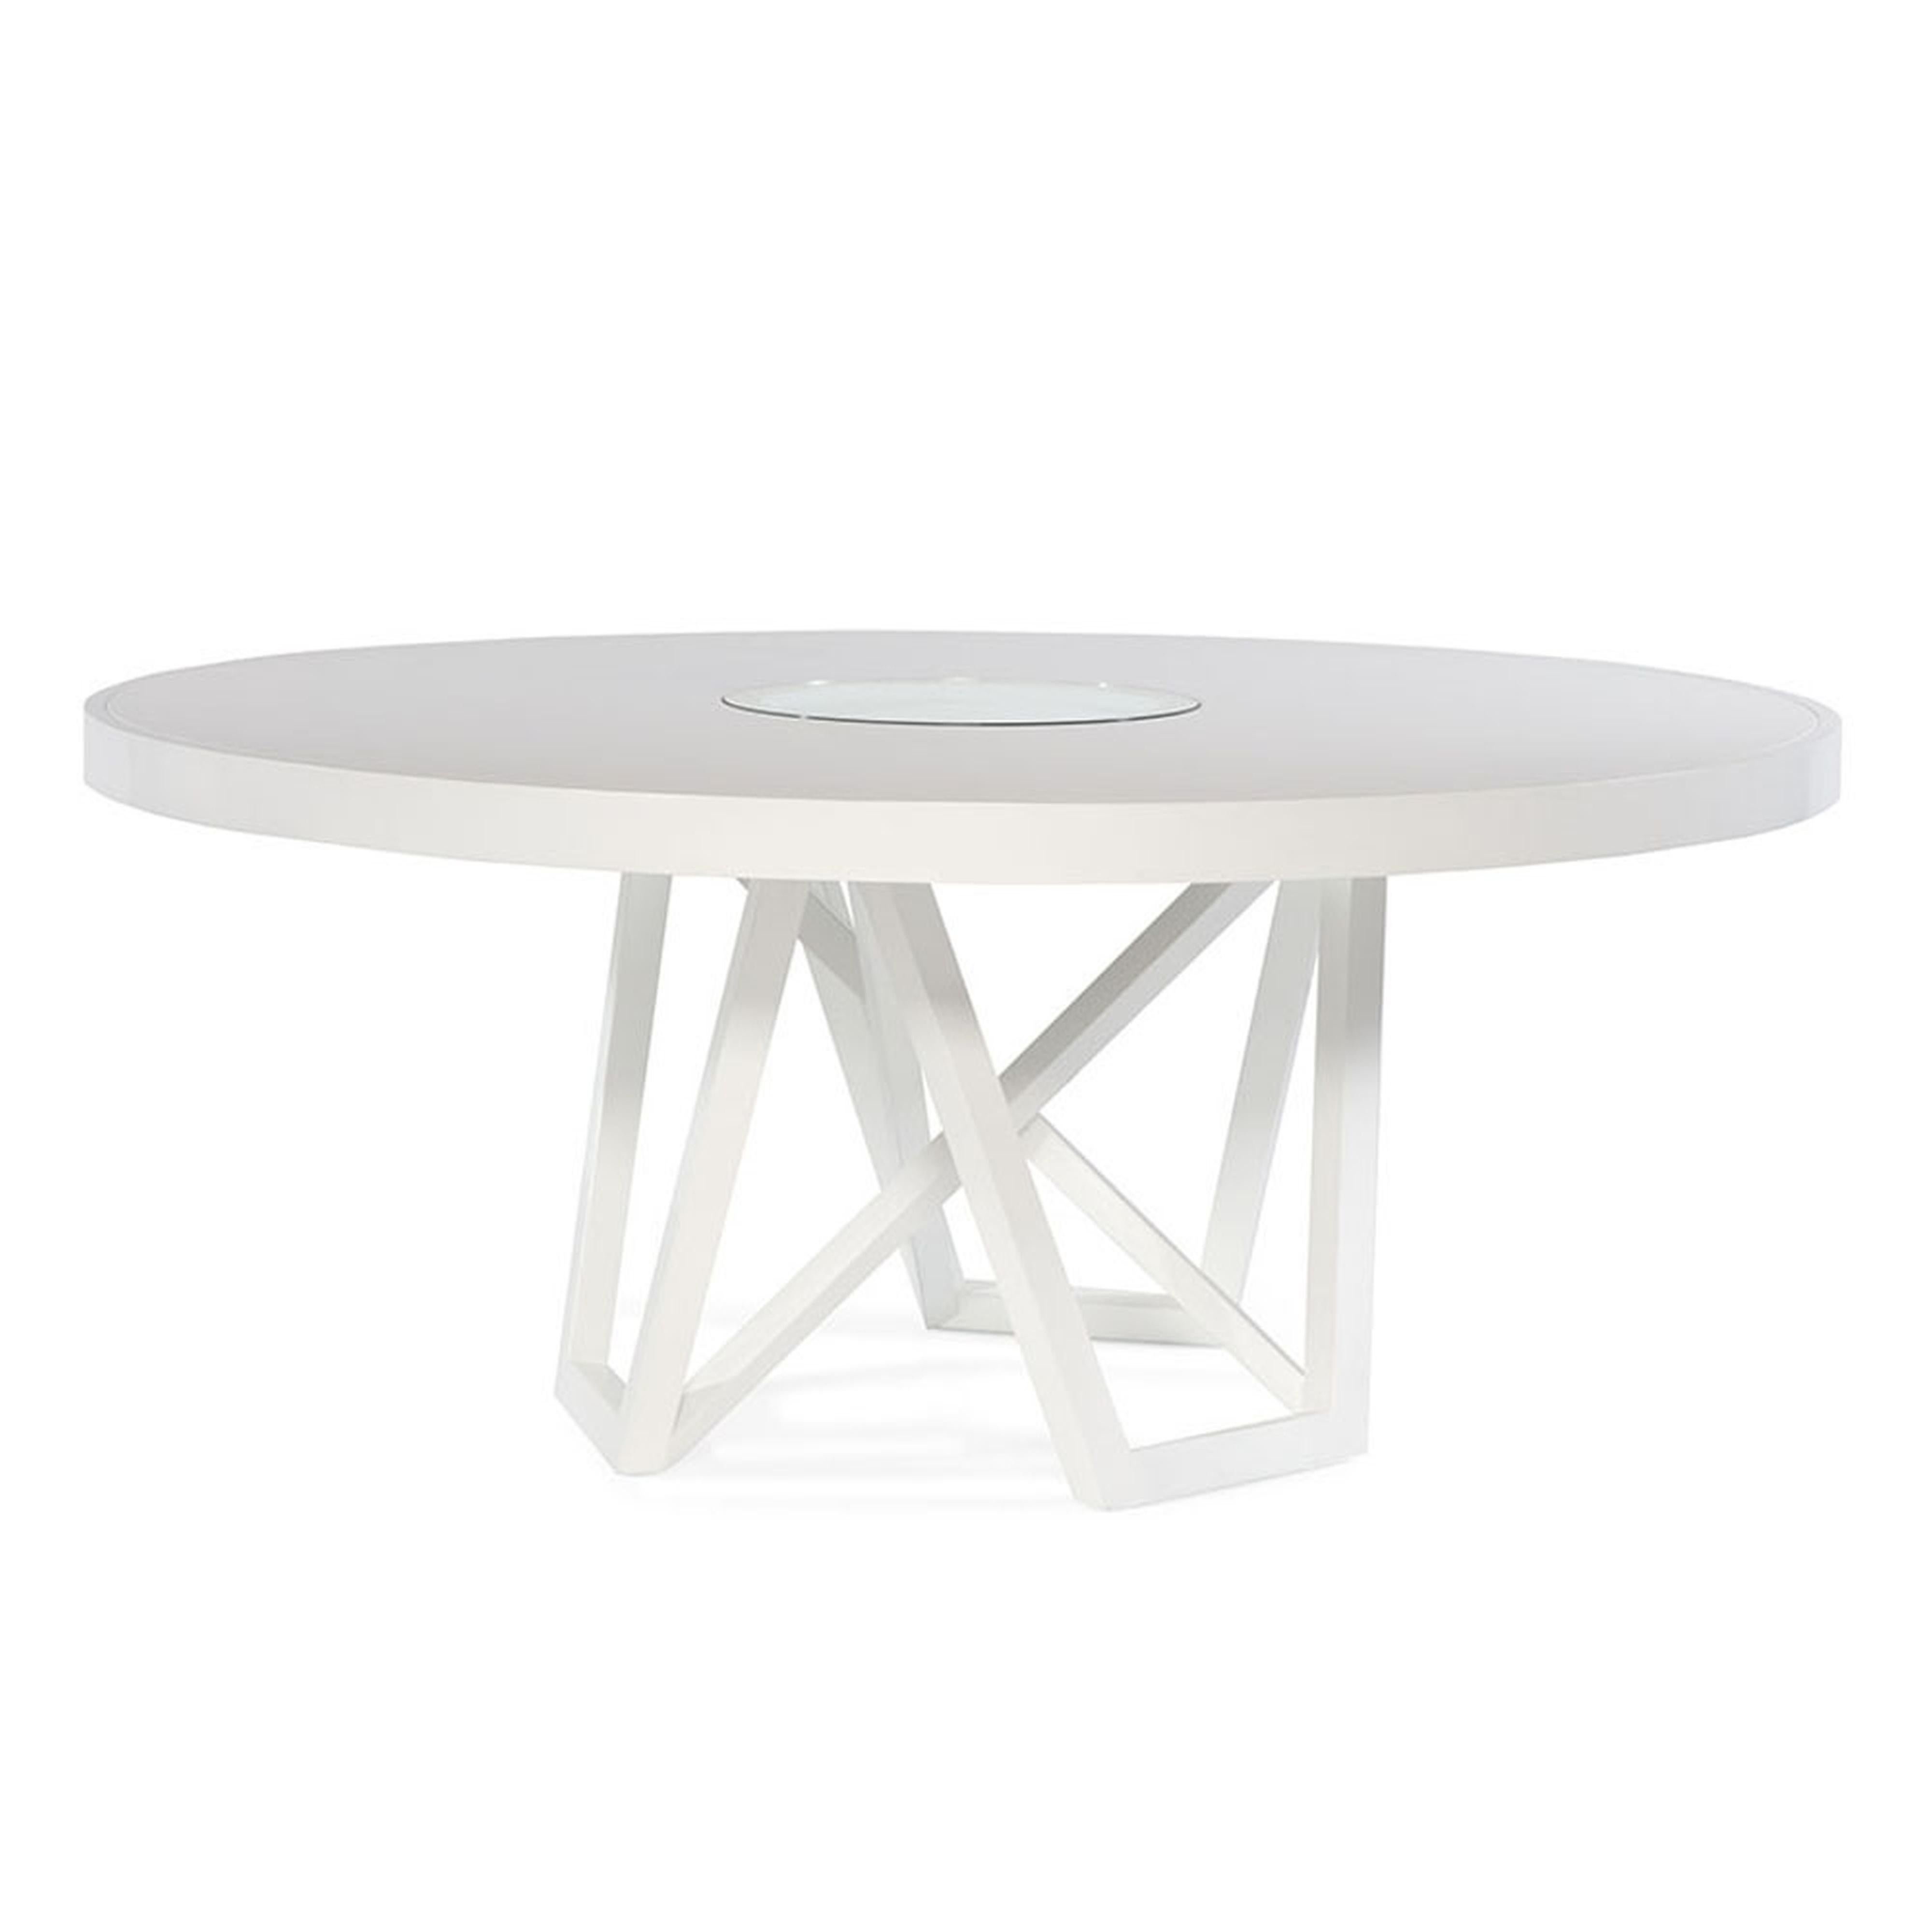 balboa outdoor round dining table